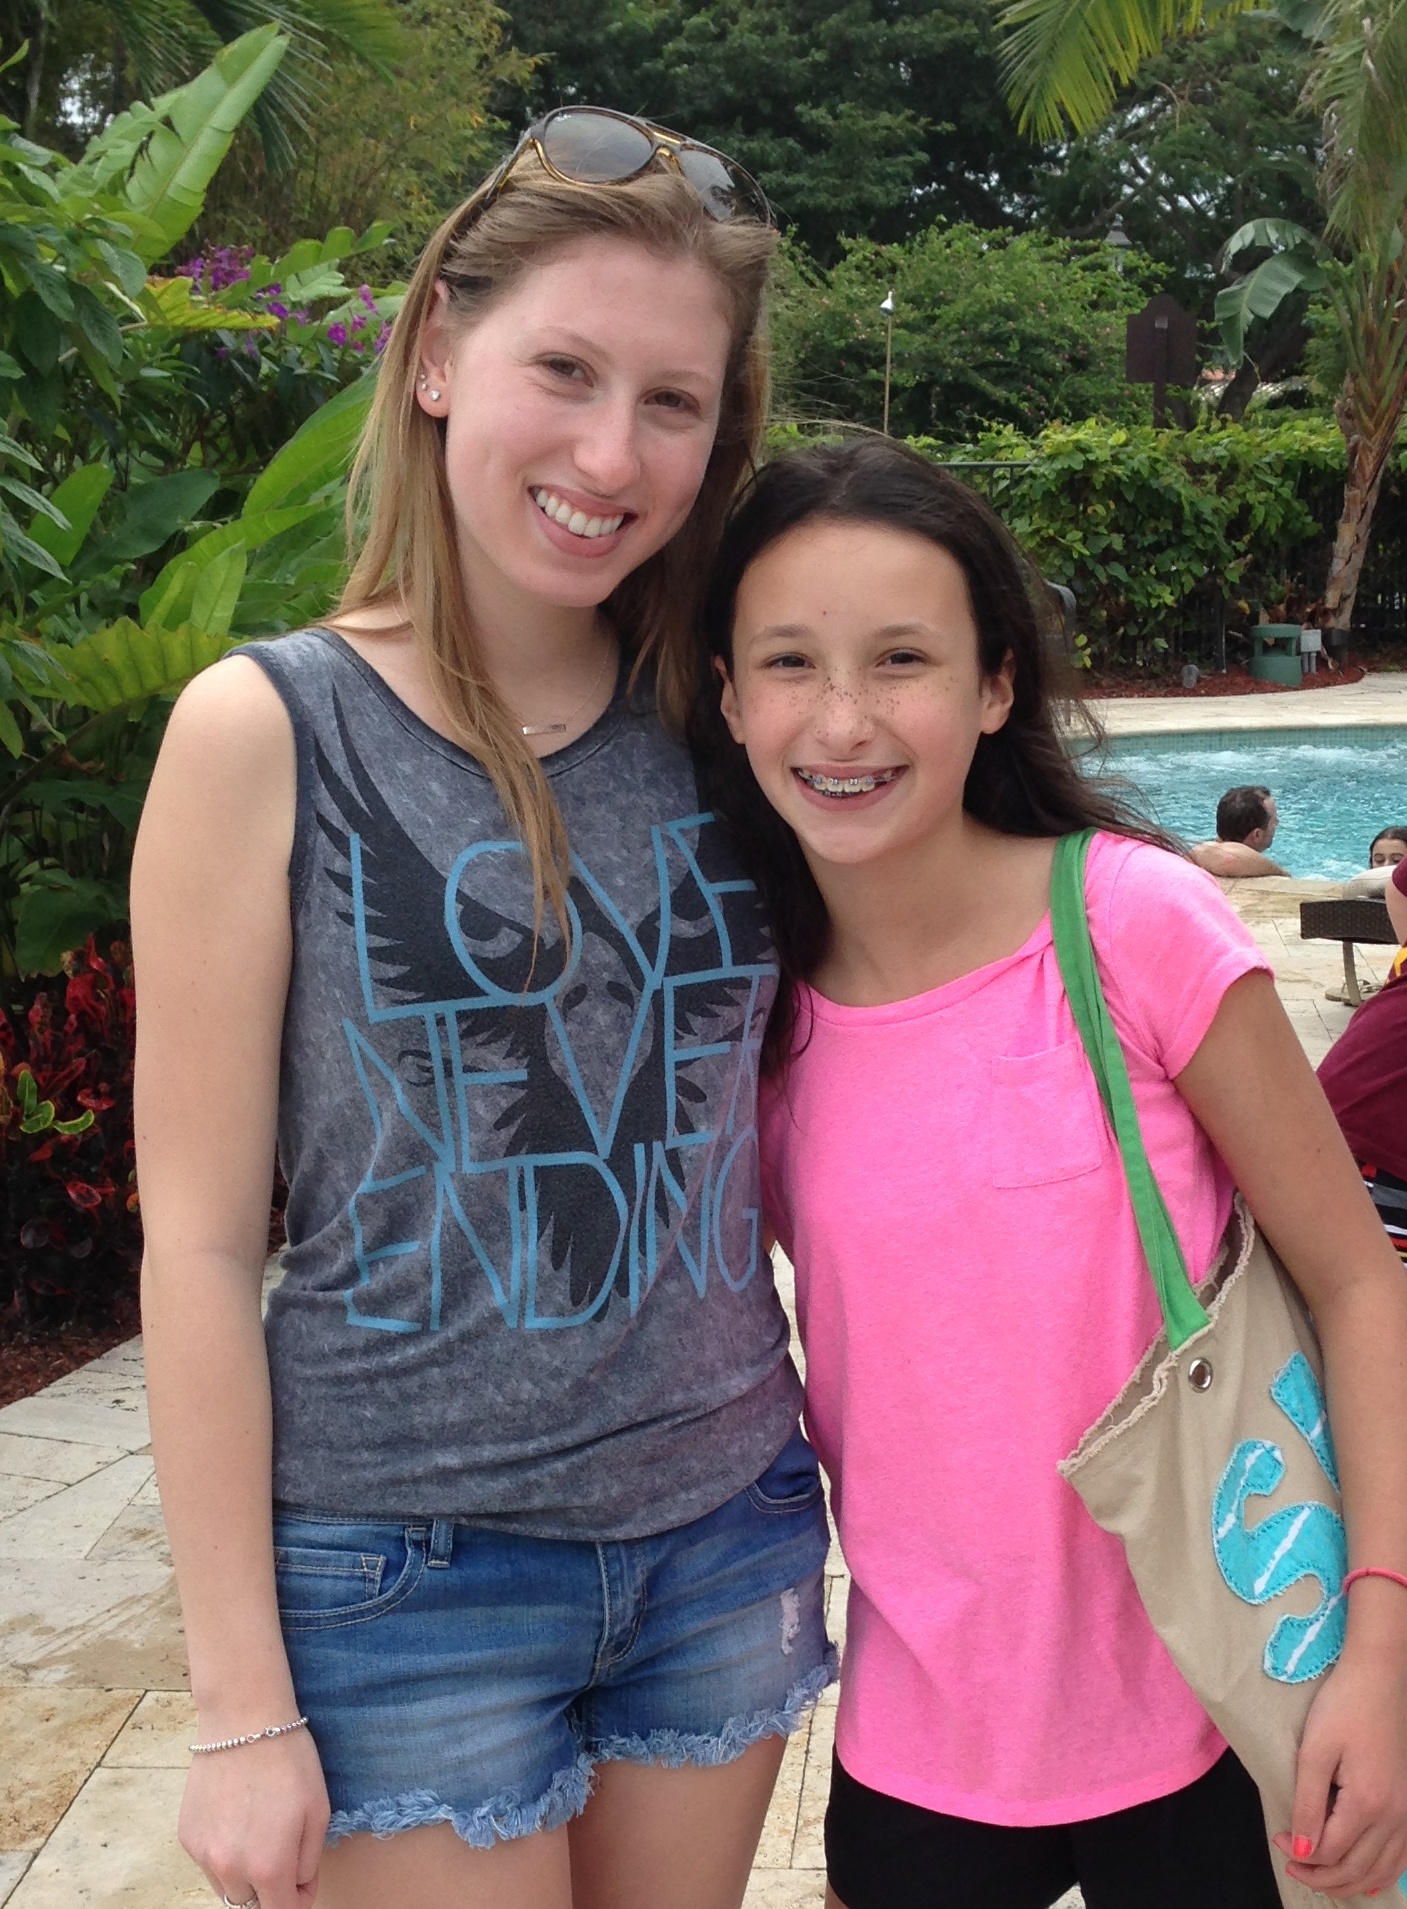 Counselor Alex saw her camper Emma while away in Florida.